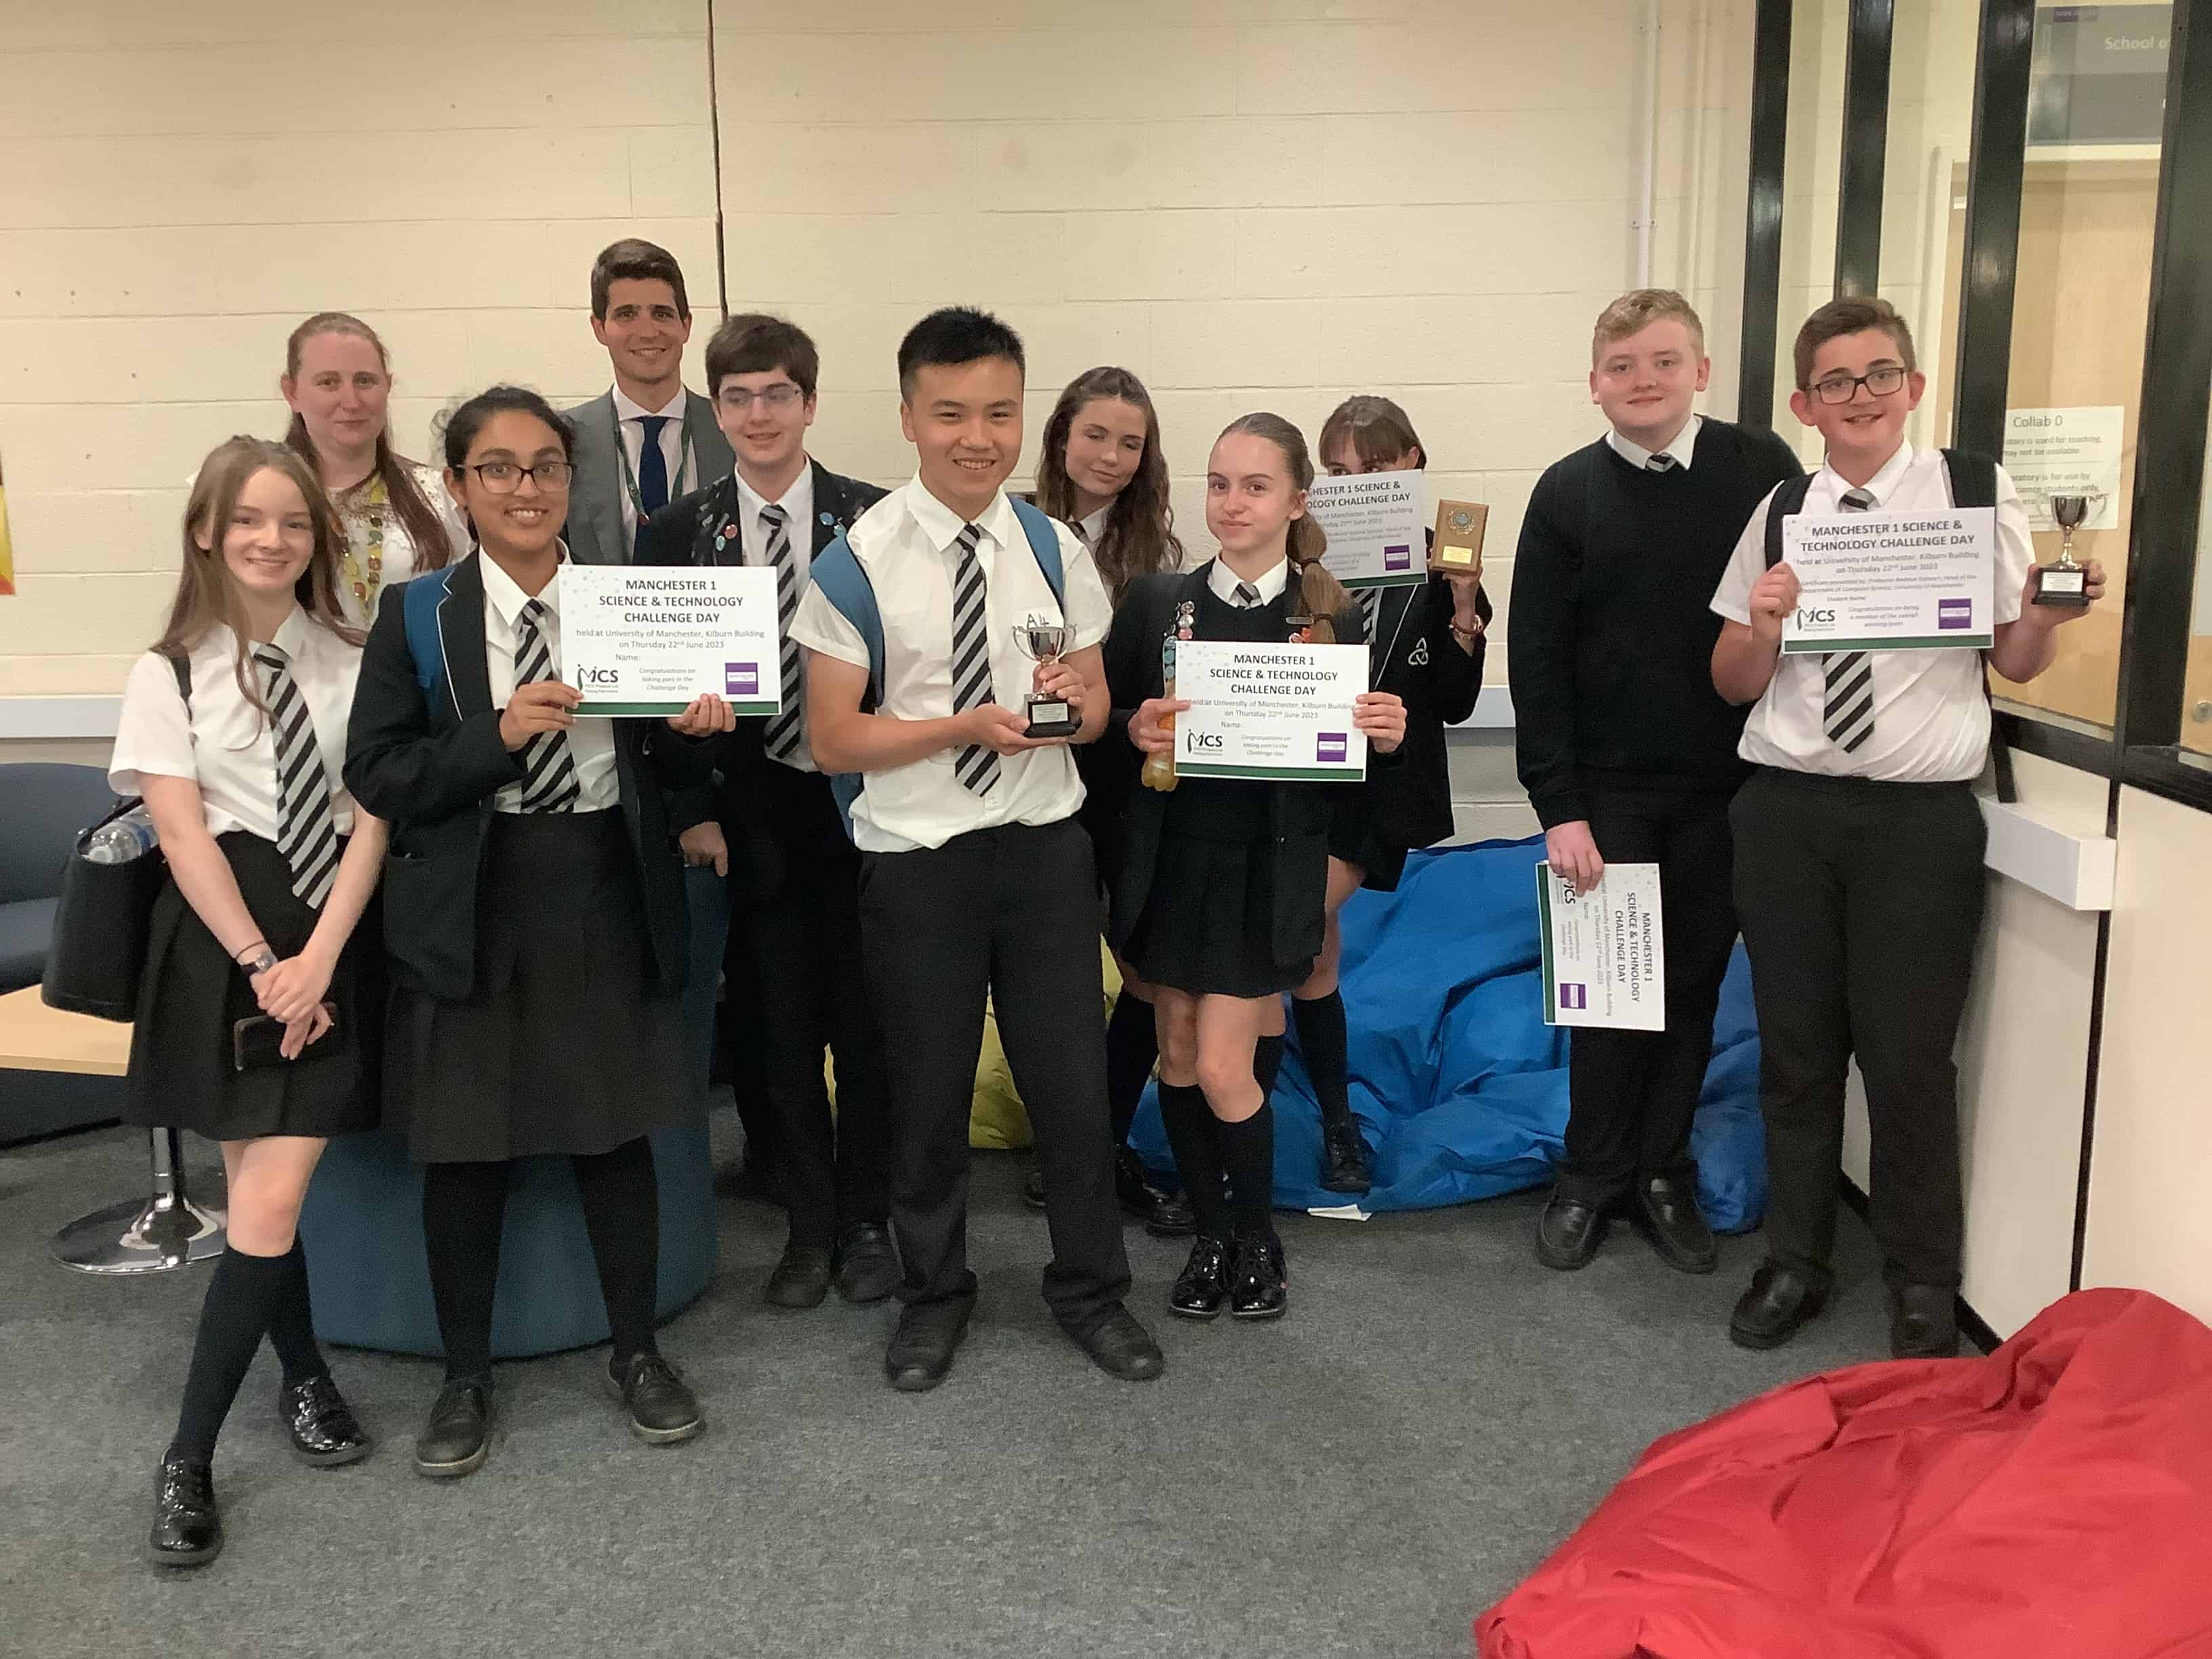 Laurus Ryecroft students stand together holding certificates awarded to them for their participation in the MCS Science and Technology Challenge Day, during Super Science Week.